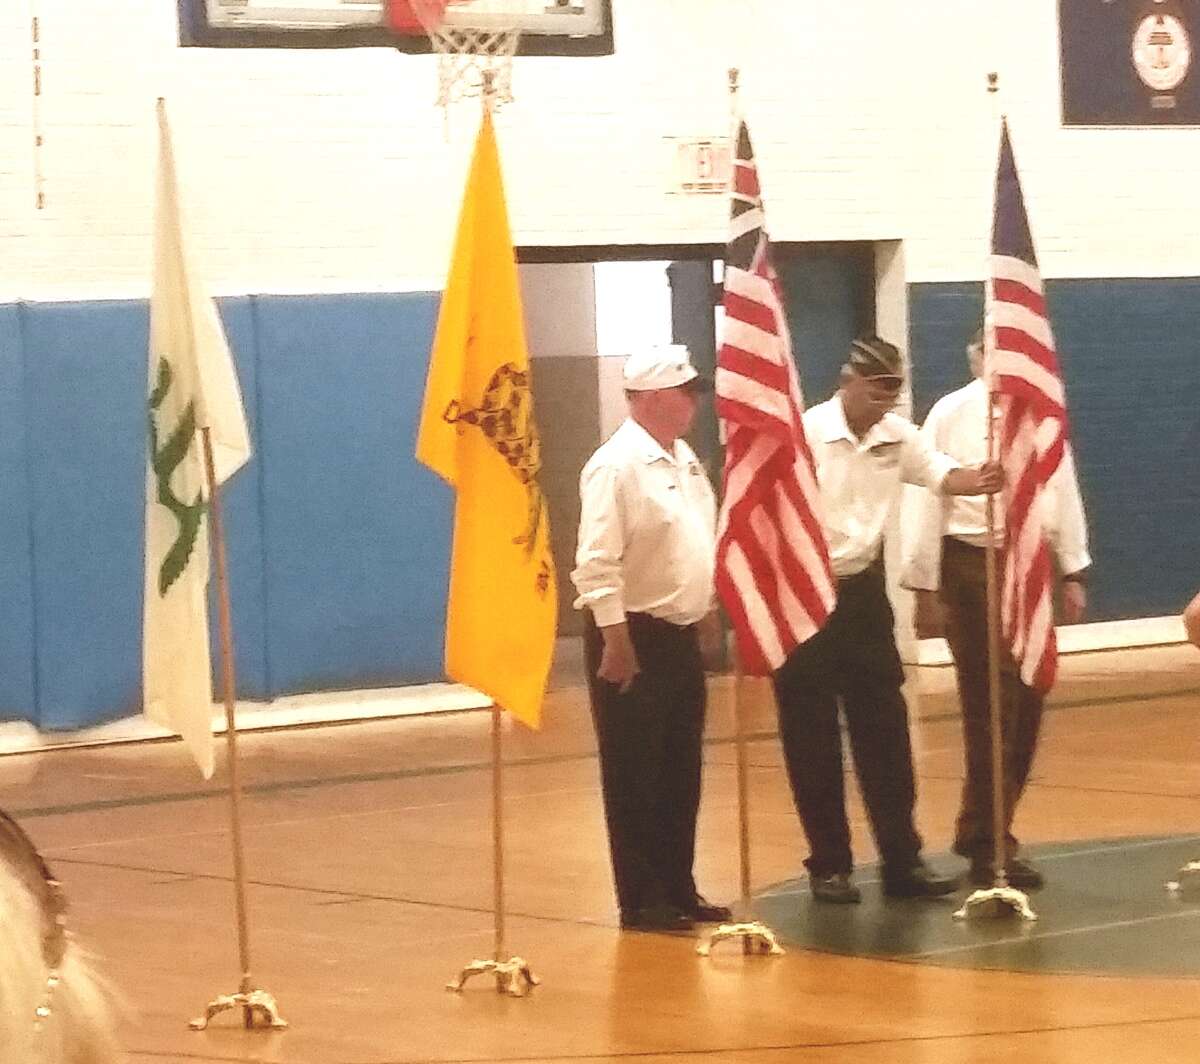 Mayor Mark Boughton was the keynote speaker at the 2015 Flag Day ceremony, presented by the Danbury Elks. It was held on Sunday June 14, 2015 at the War Memorial and a reception followed at the Danbury Elks Lodge on Sugar Hollow Road.